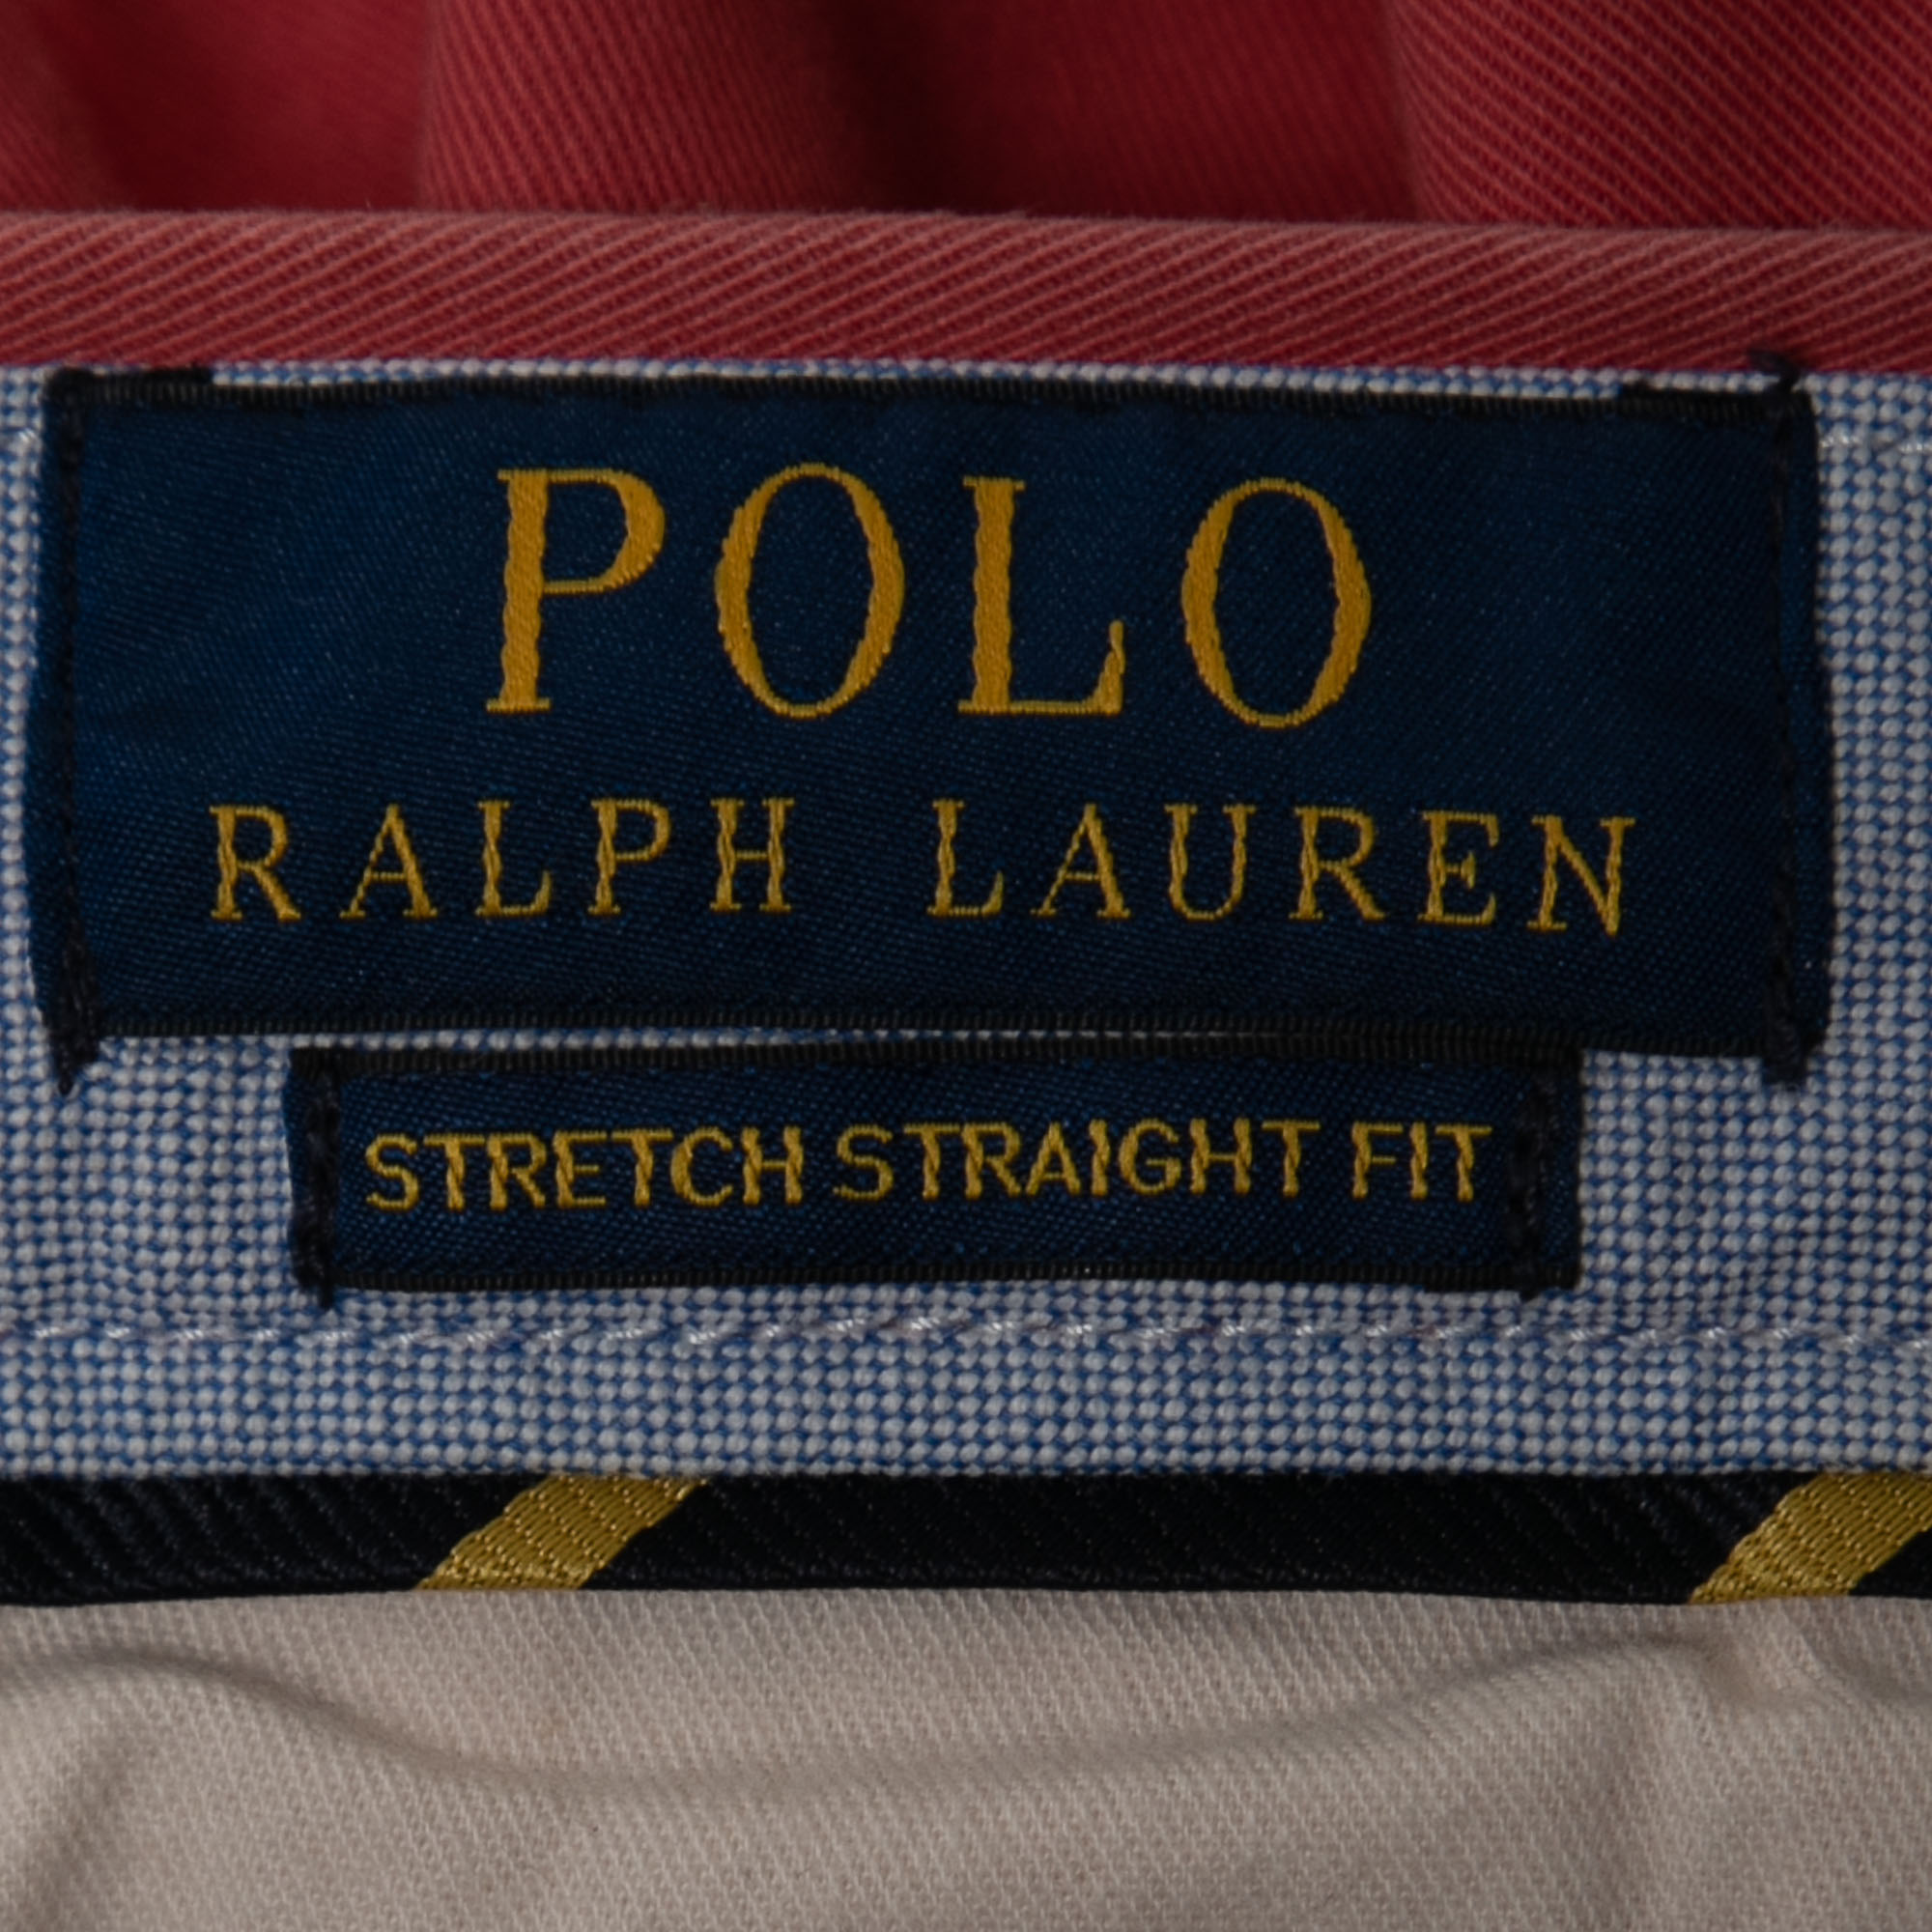 Polo Ralph Lauren Red Cotton Twill Chino Trousers L